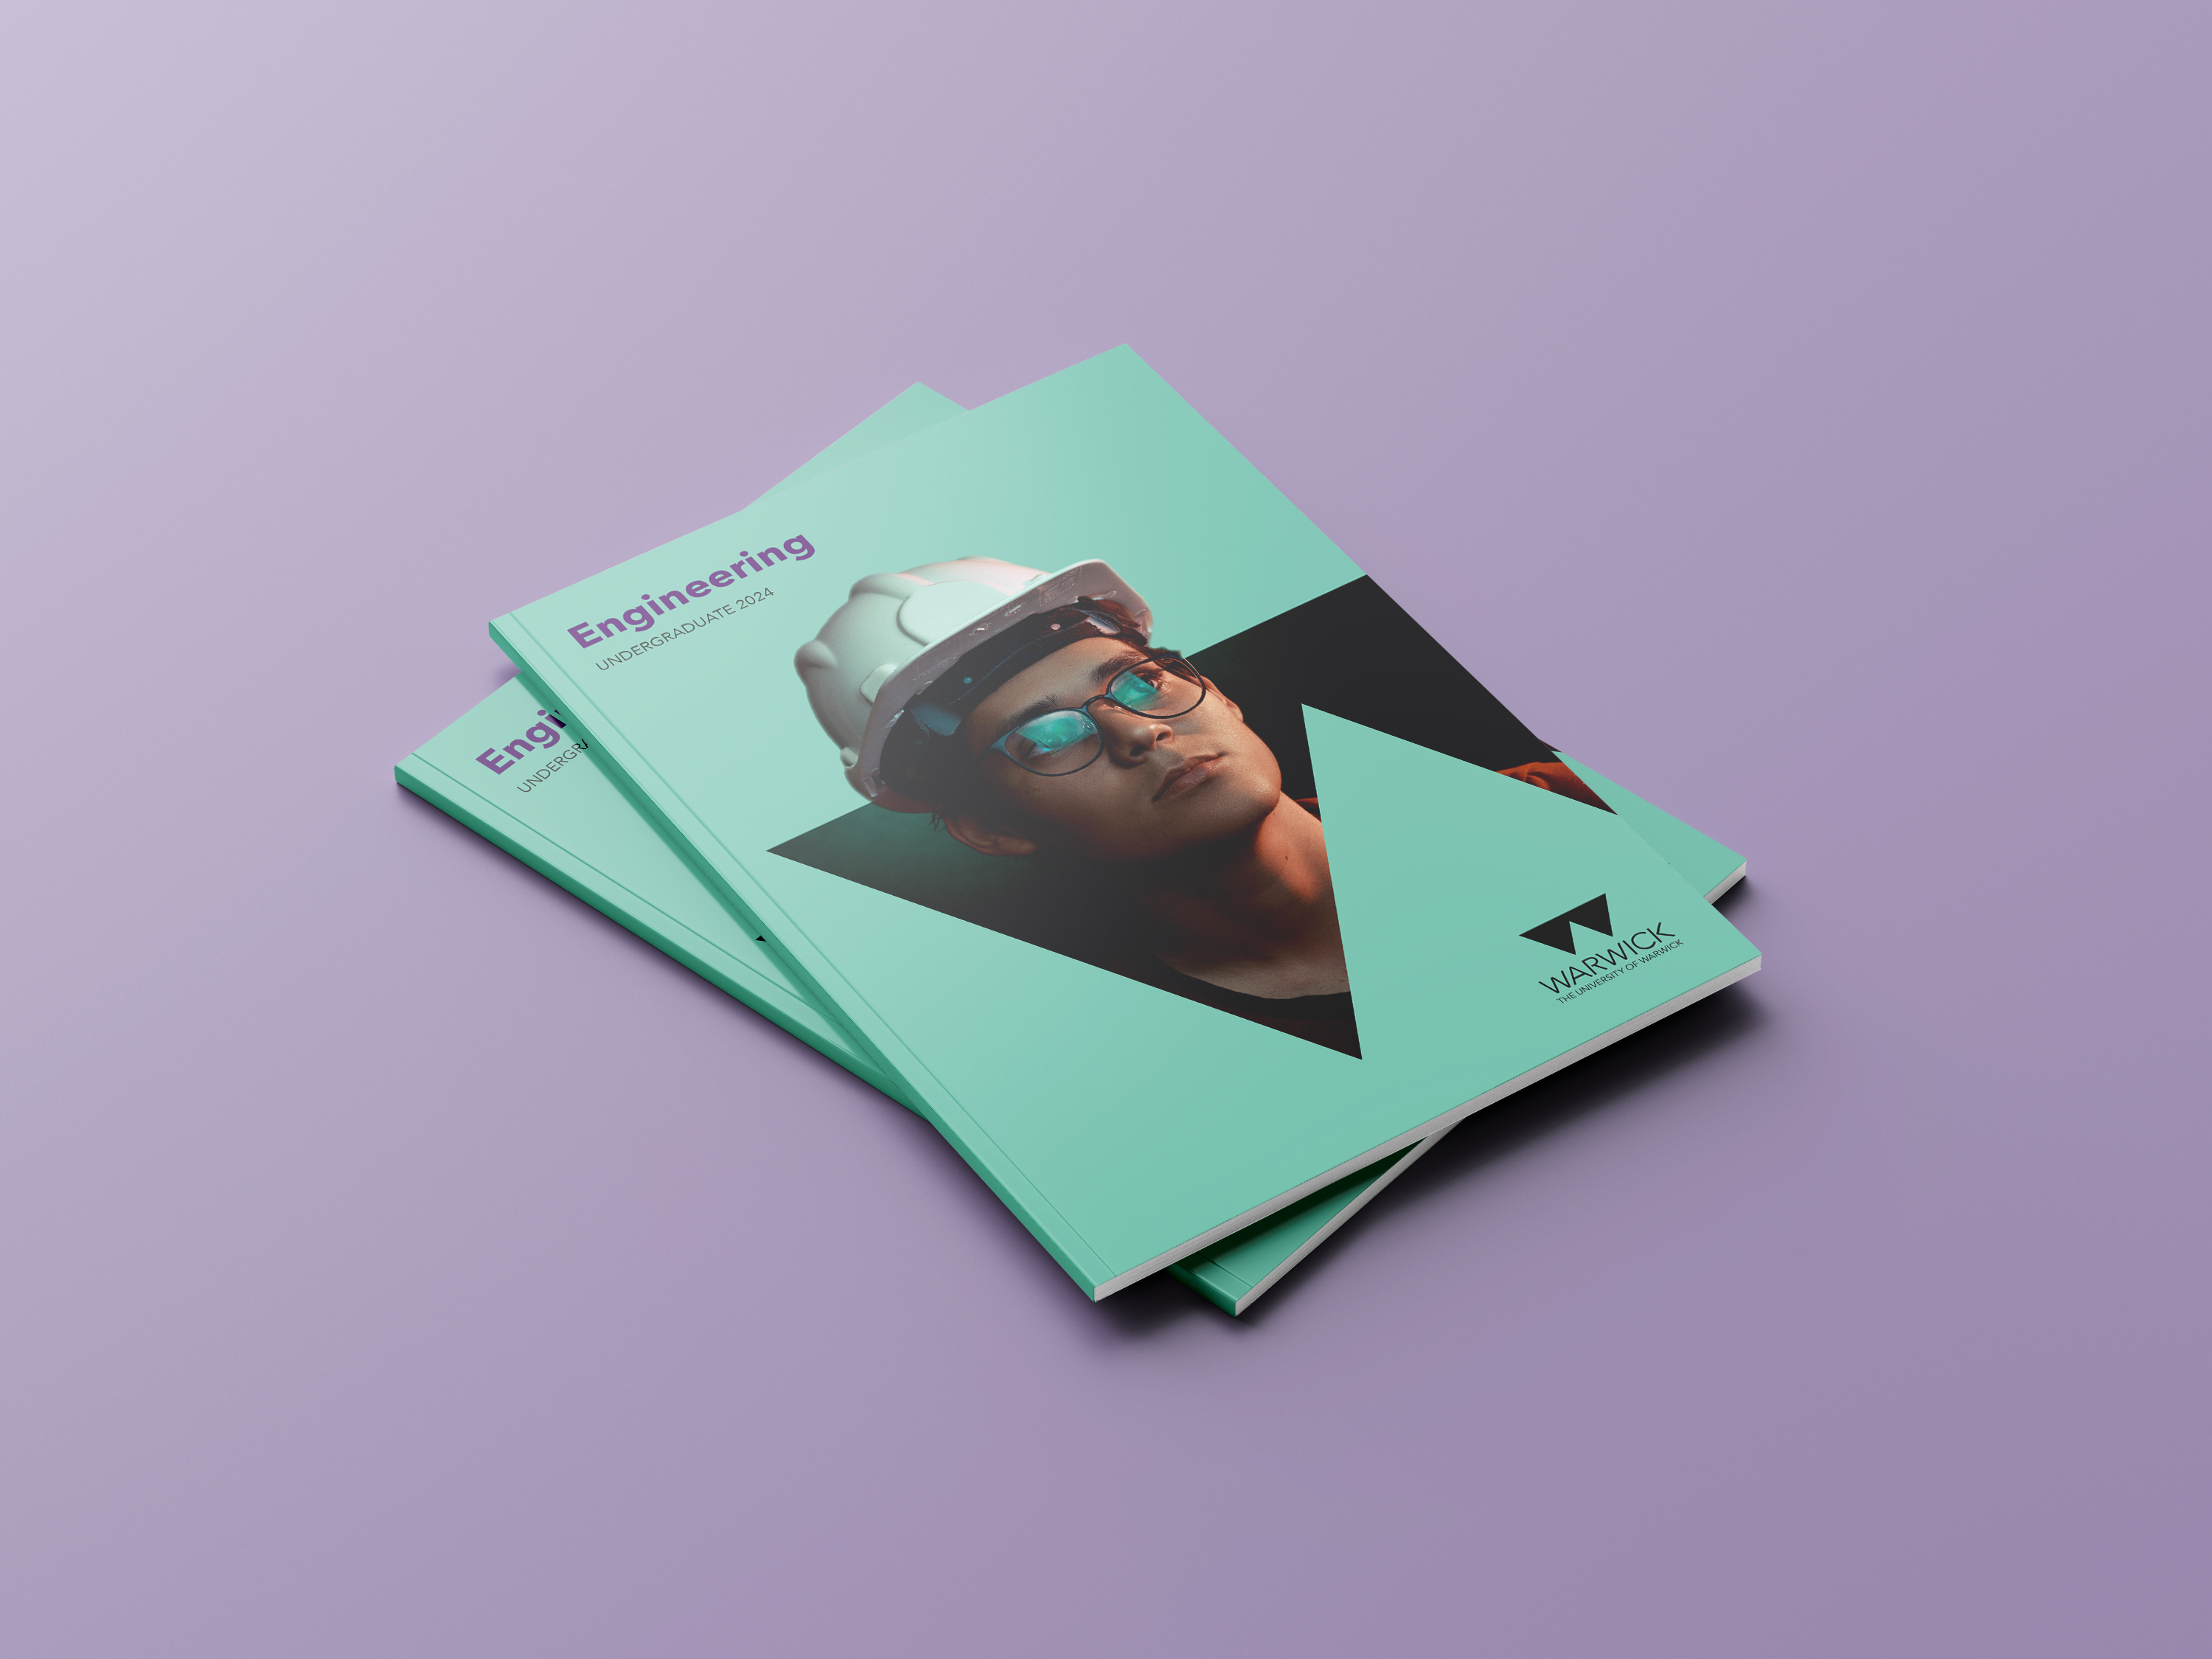 An example of a branded brochure cover